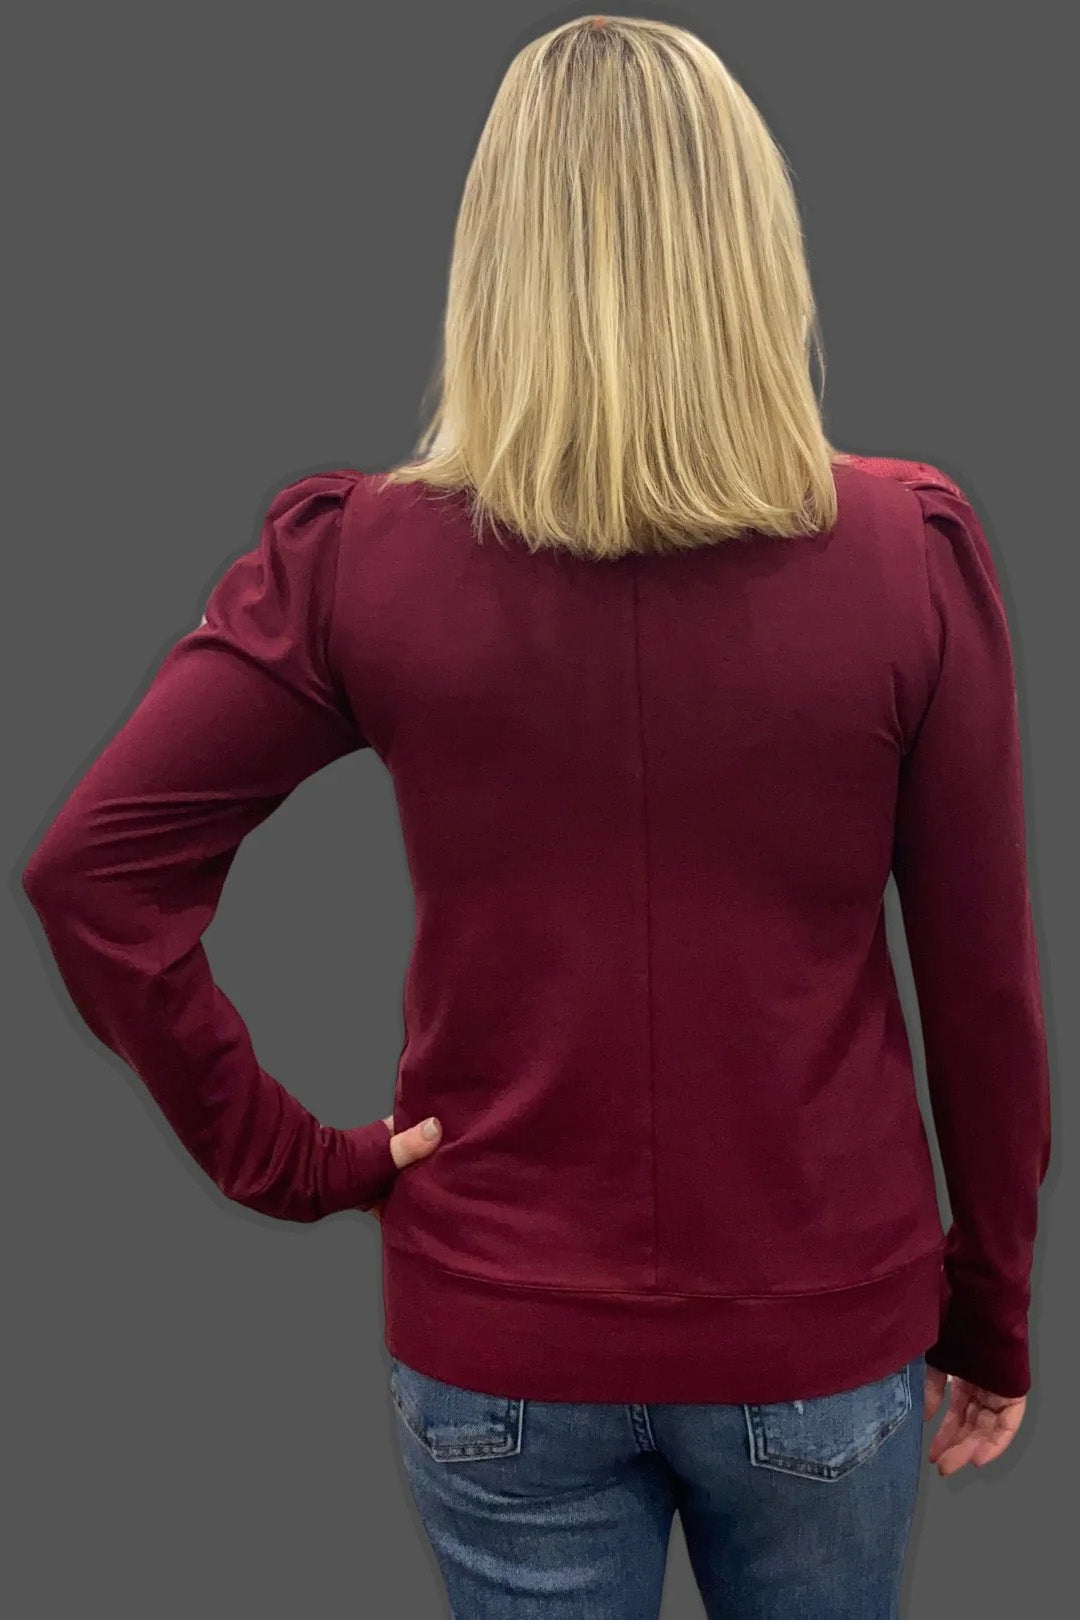 Sassy Sweashirt by Dotty, back view, Burgundy, puffed sleeves, loose fit through torso, centre back seam, extra long sleeves, eco-fabric, bamboo rayon and cotton, sizes XS to 1X, made in Toronto